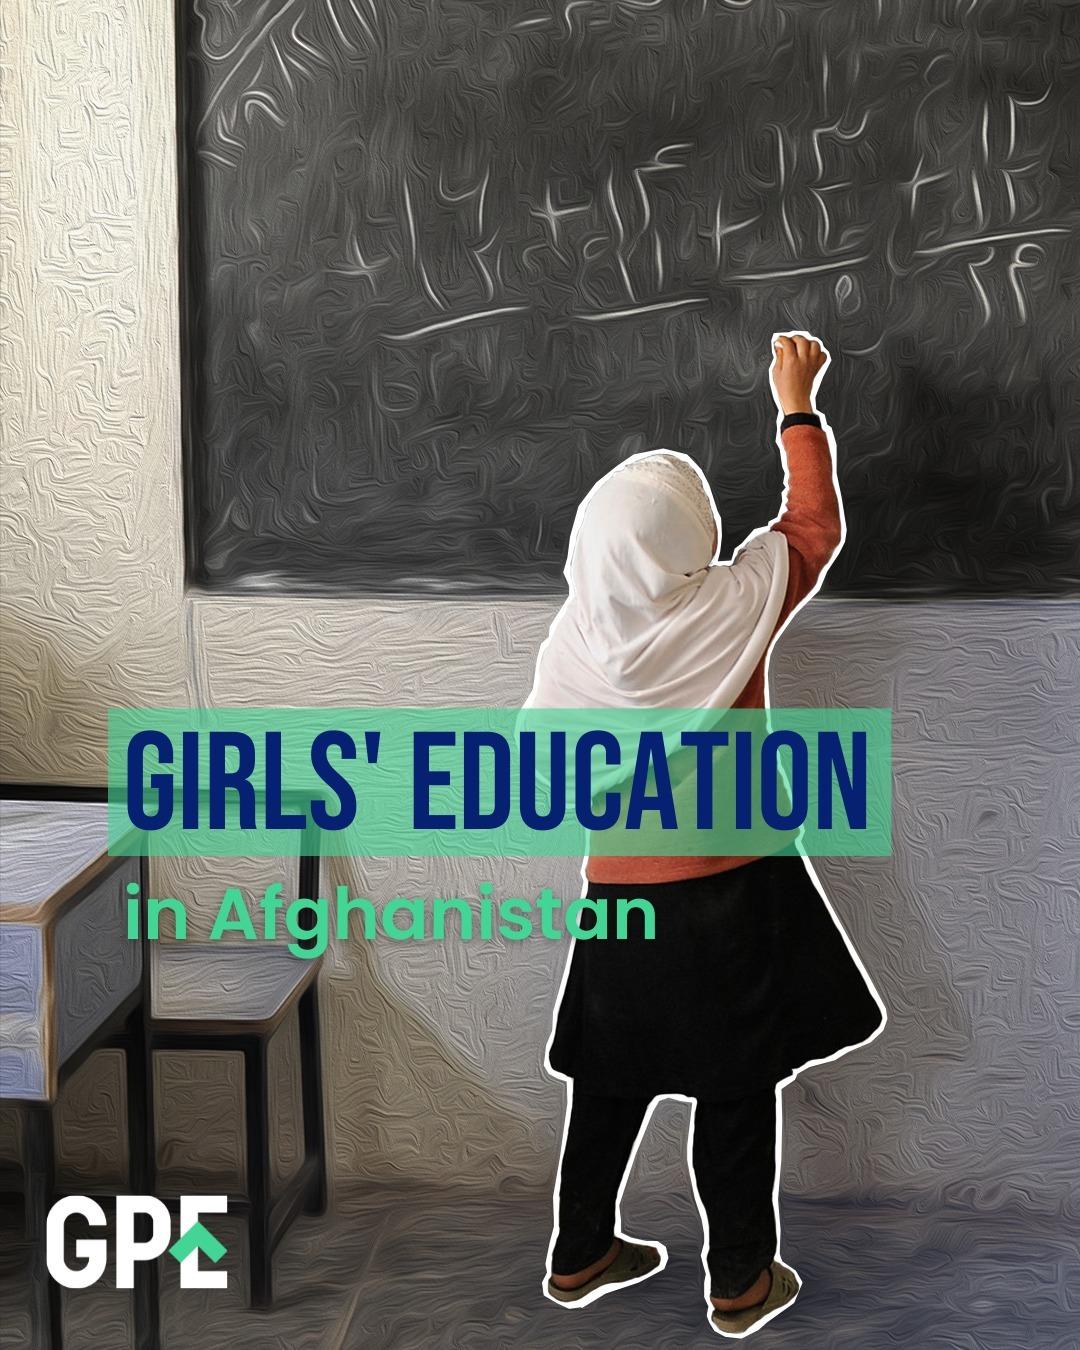 class="content__text"
 Building the stable and prosperous future that the people of #Afghanistan deserve depends on educated girls and women.

Join us on #WomensDay and demand to #LetAfghanGirlsLearn!

 #TransformingEducation 
 